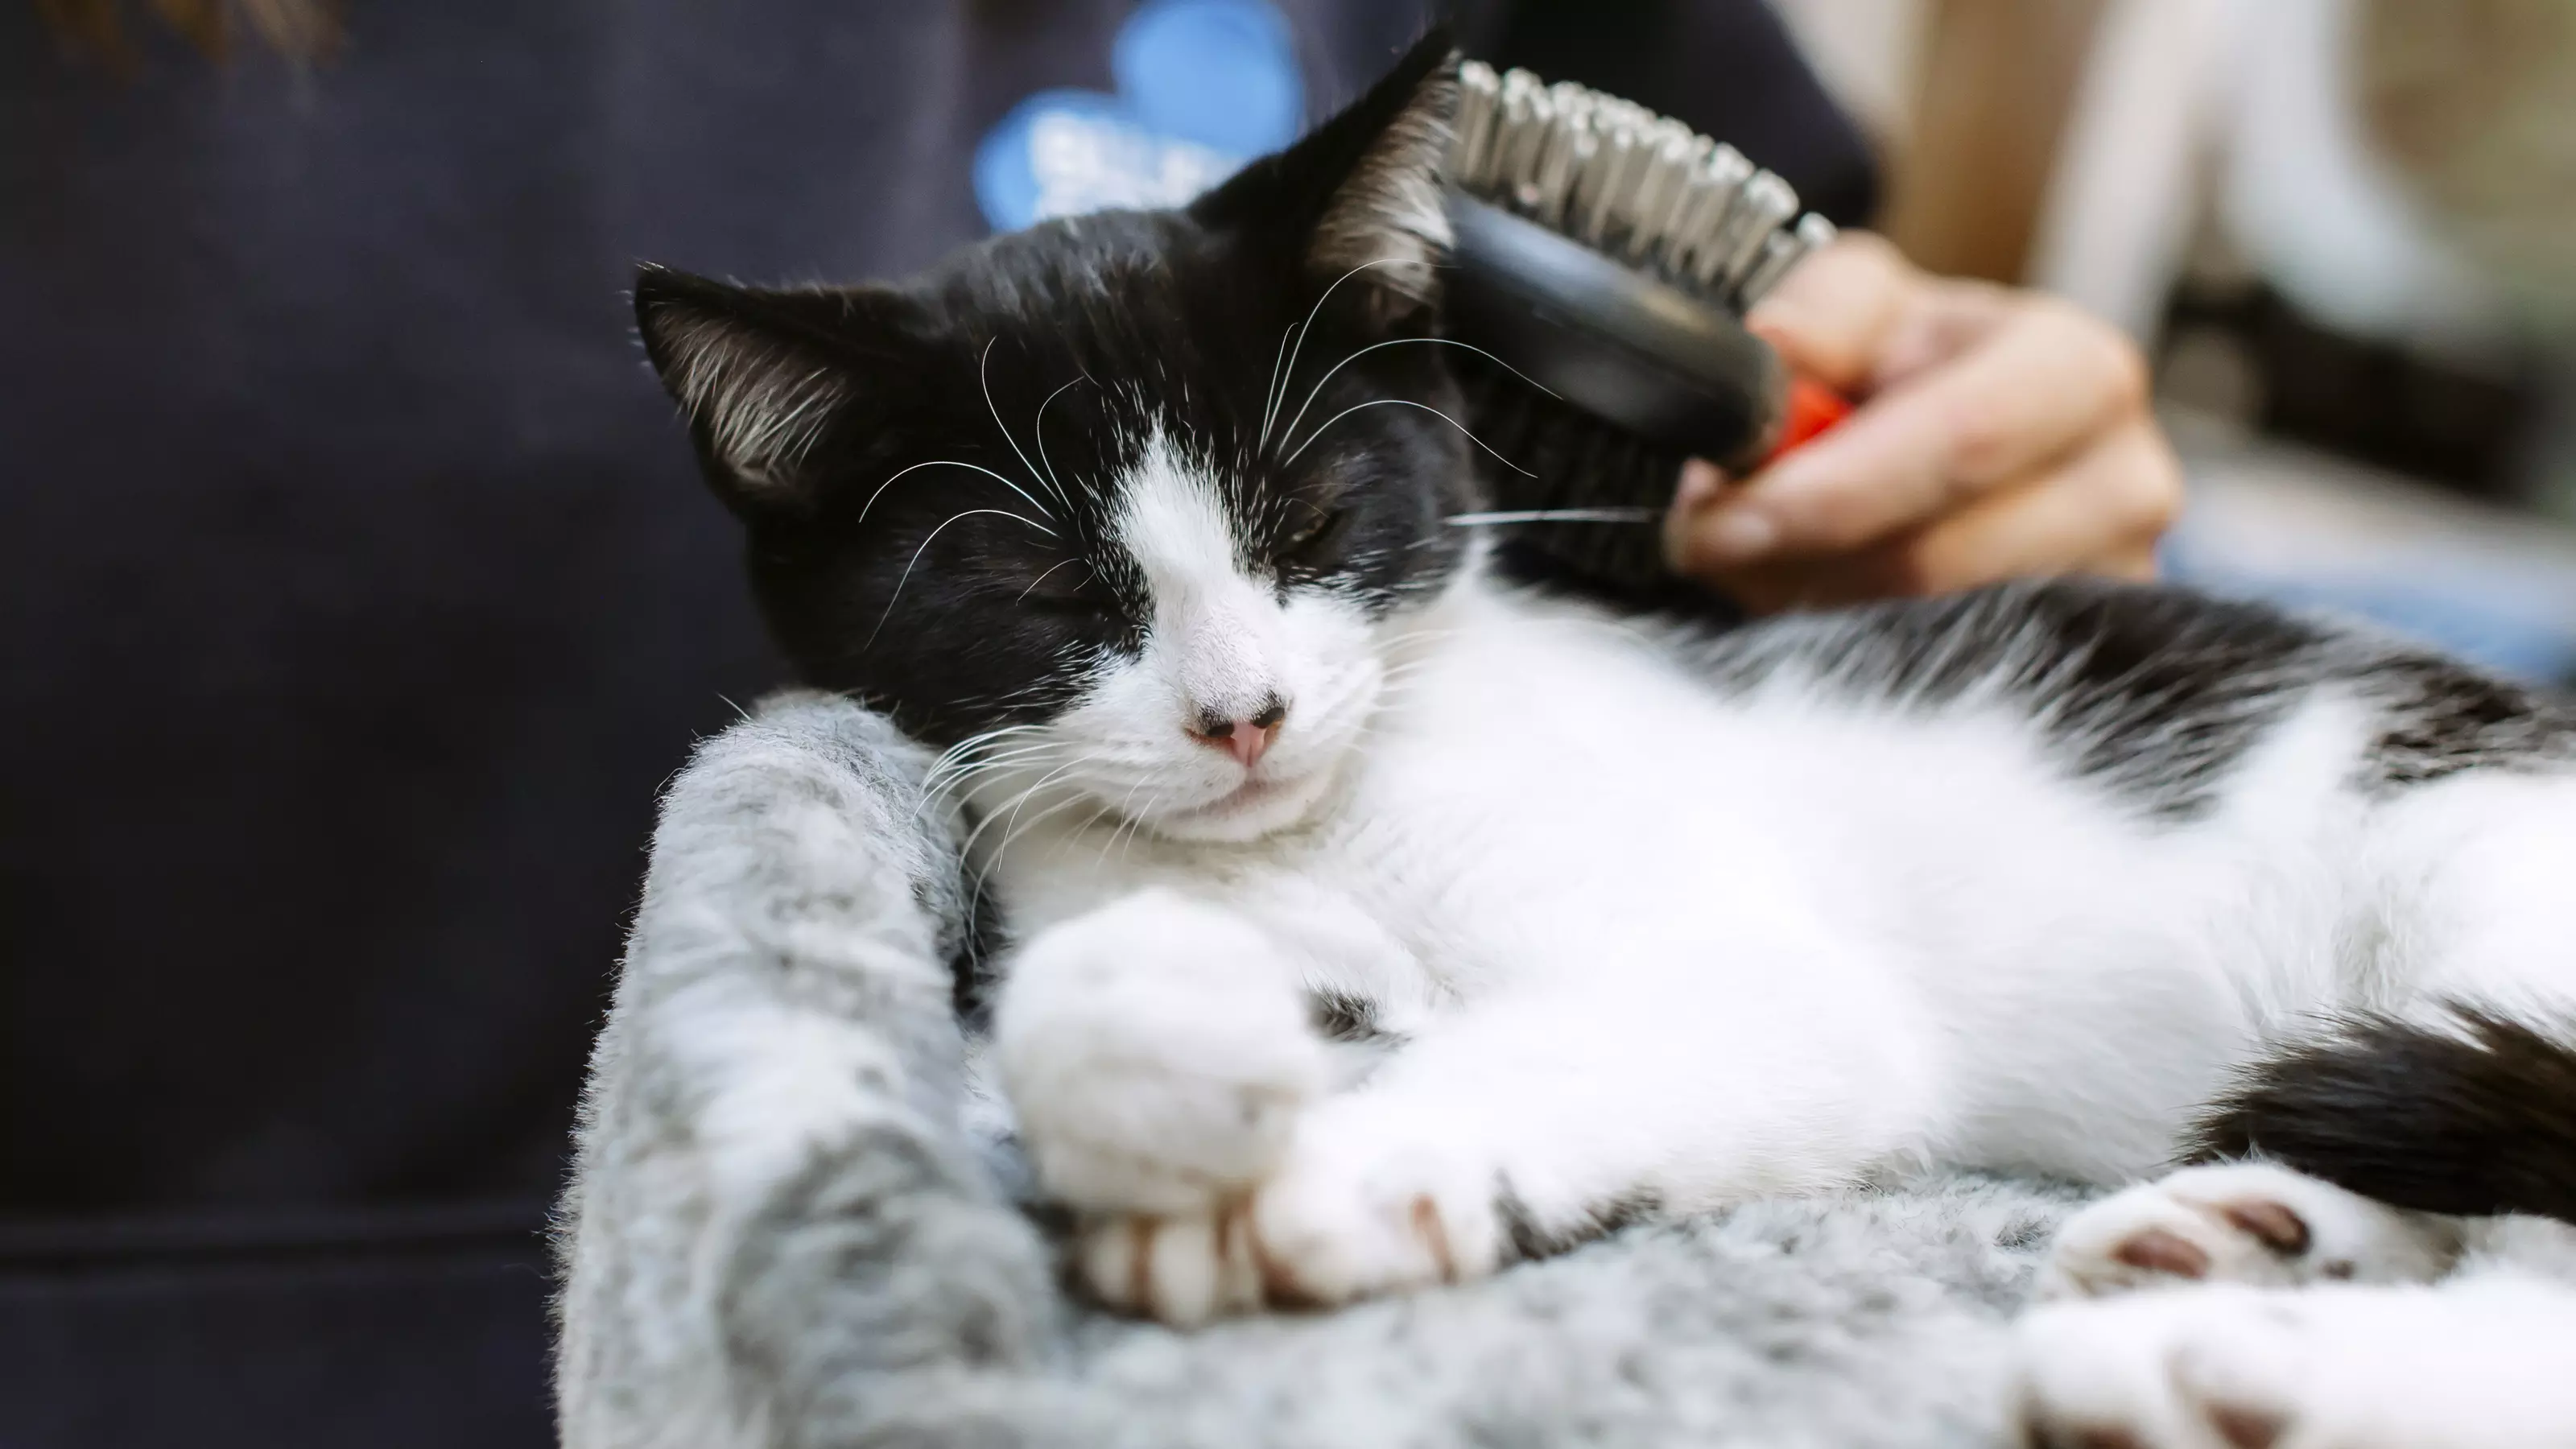 A black and white cat enjoys being groomed by a Blue Cross staff member.